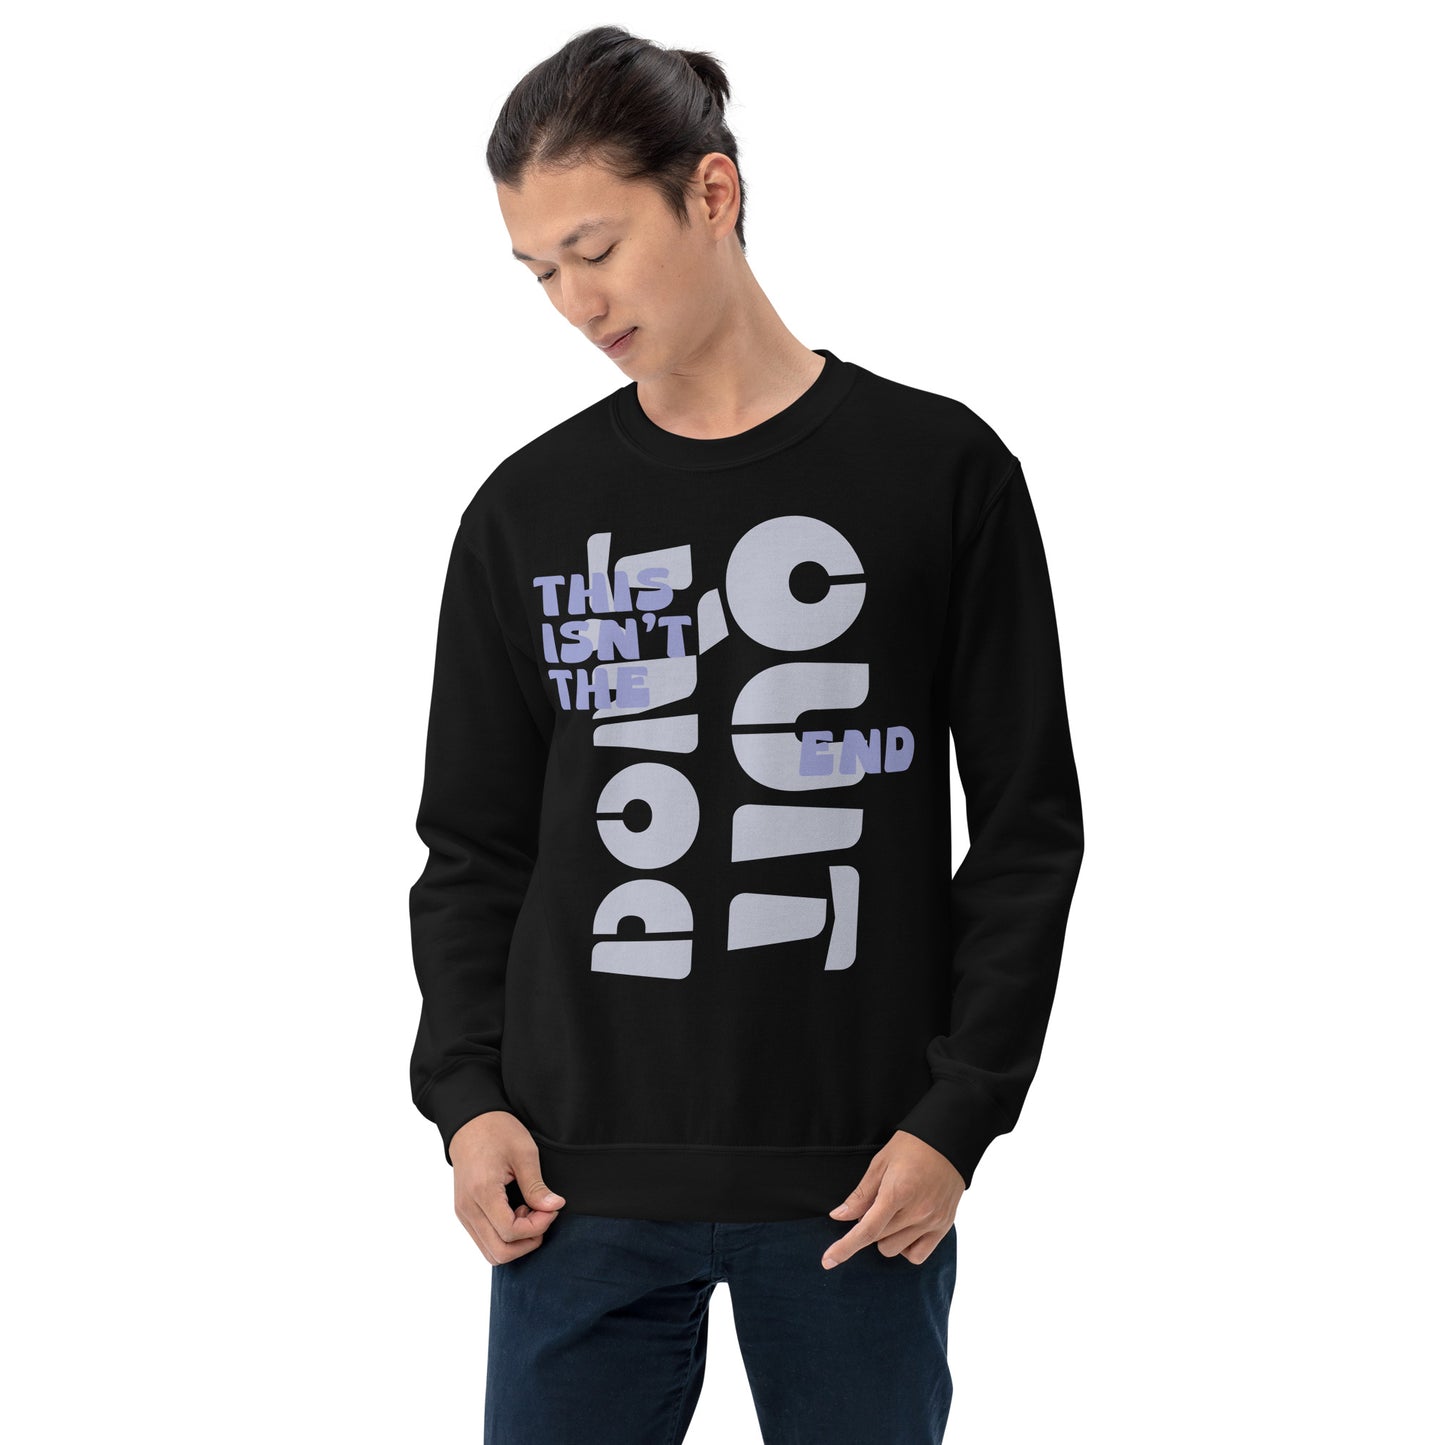 This Isn't The End, Don't Quit sweatshirt